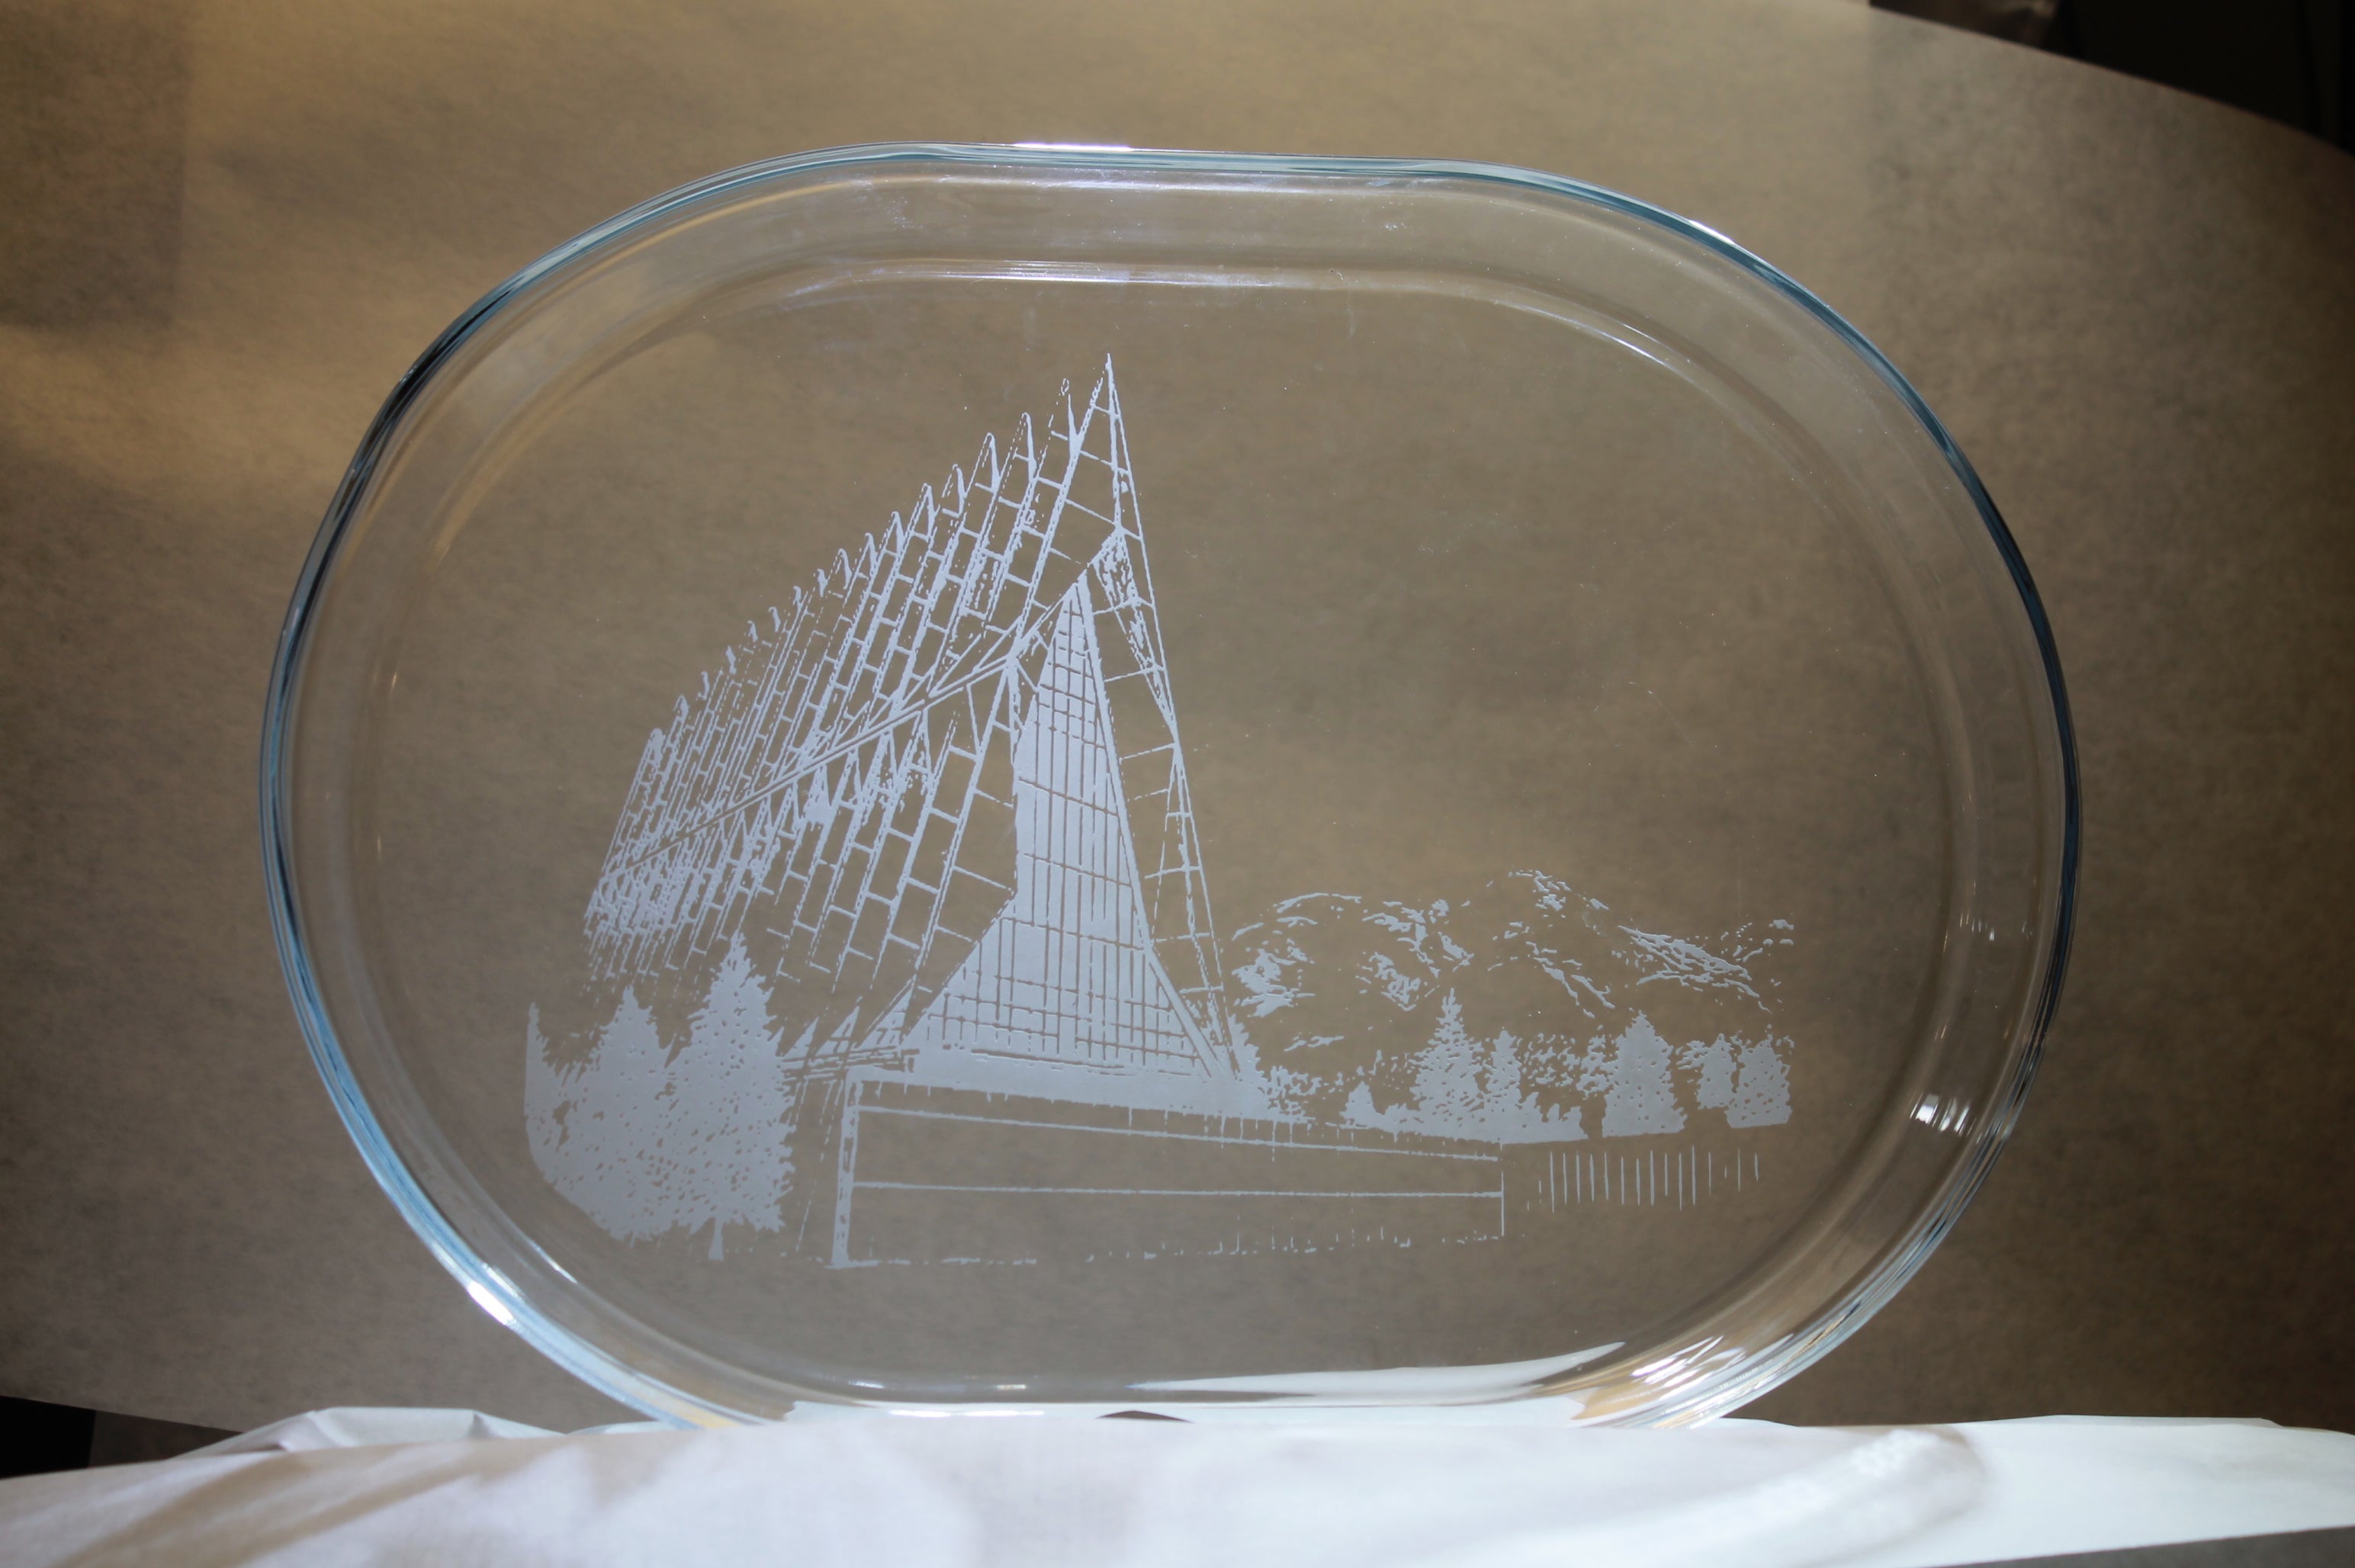 USAFA Chapel Image sand-carved clear glass serving tray platter - Samstagsandmore